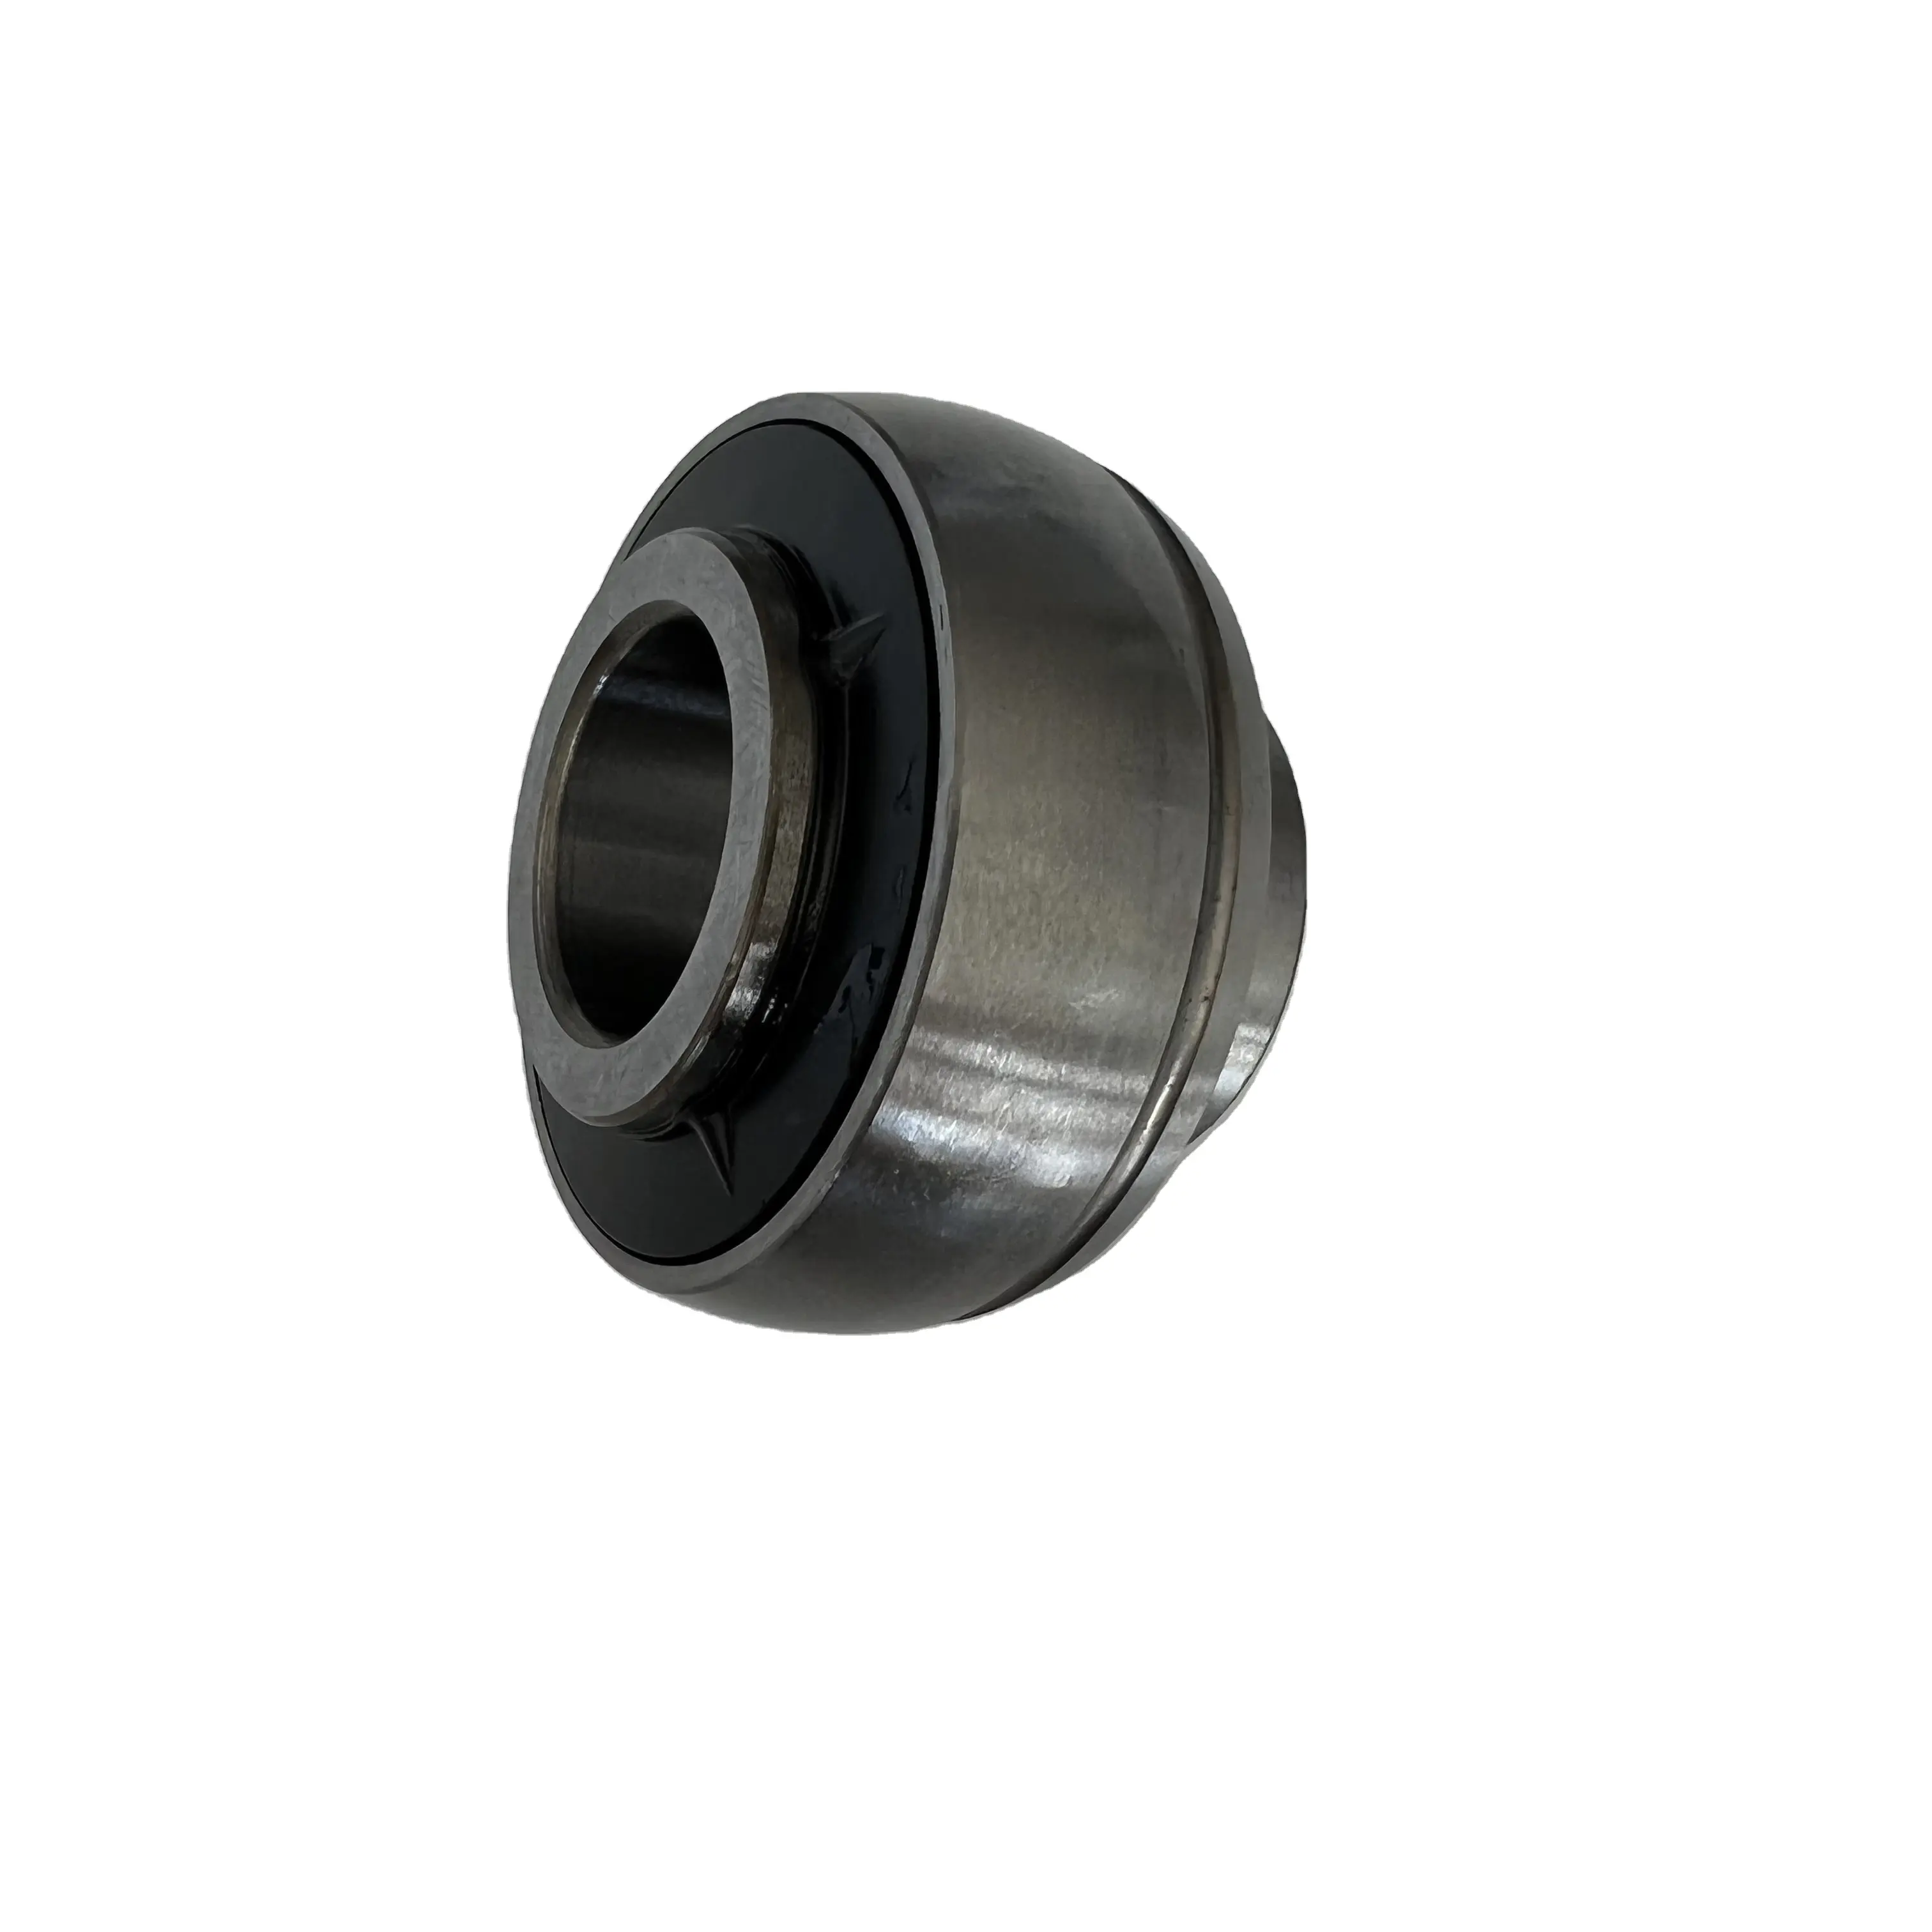 High quality Top quality insert bearing with bearing housing sb205 UC204 UEL206